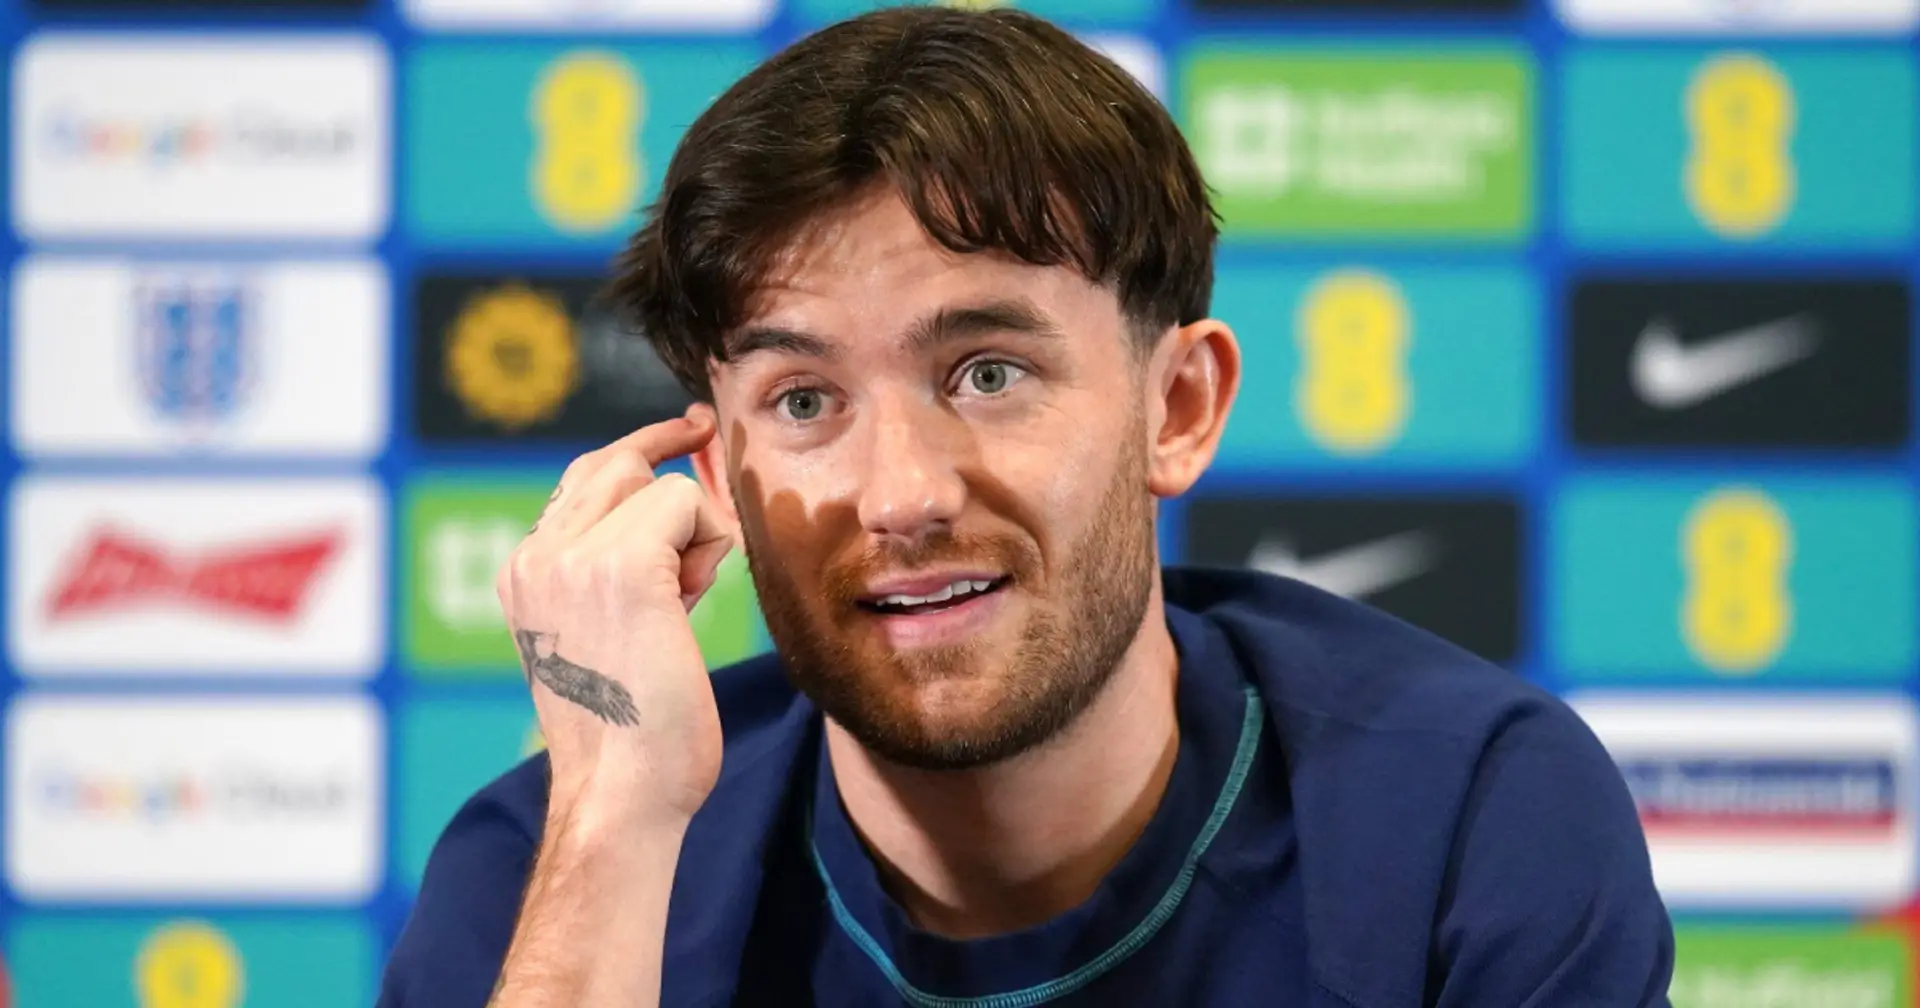 'I've been talking to someone for a few years': Chilwell slams 'silly' stigma around mental health in football